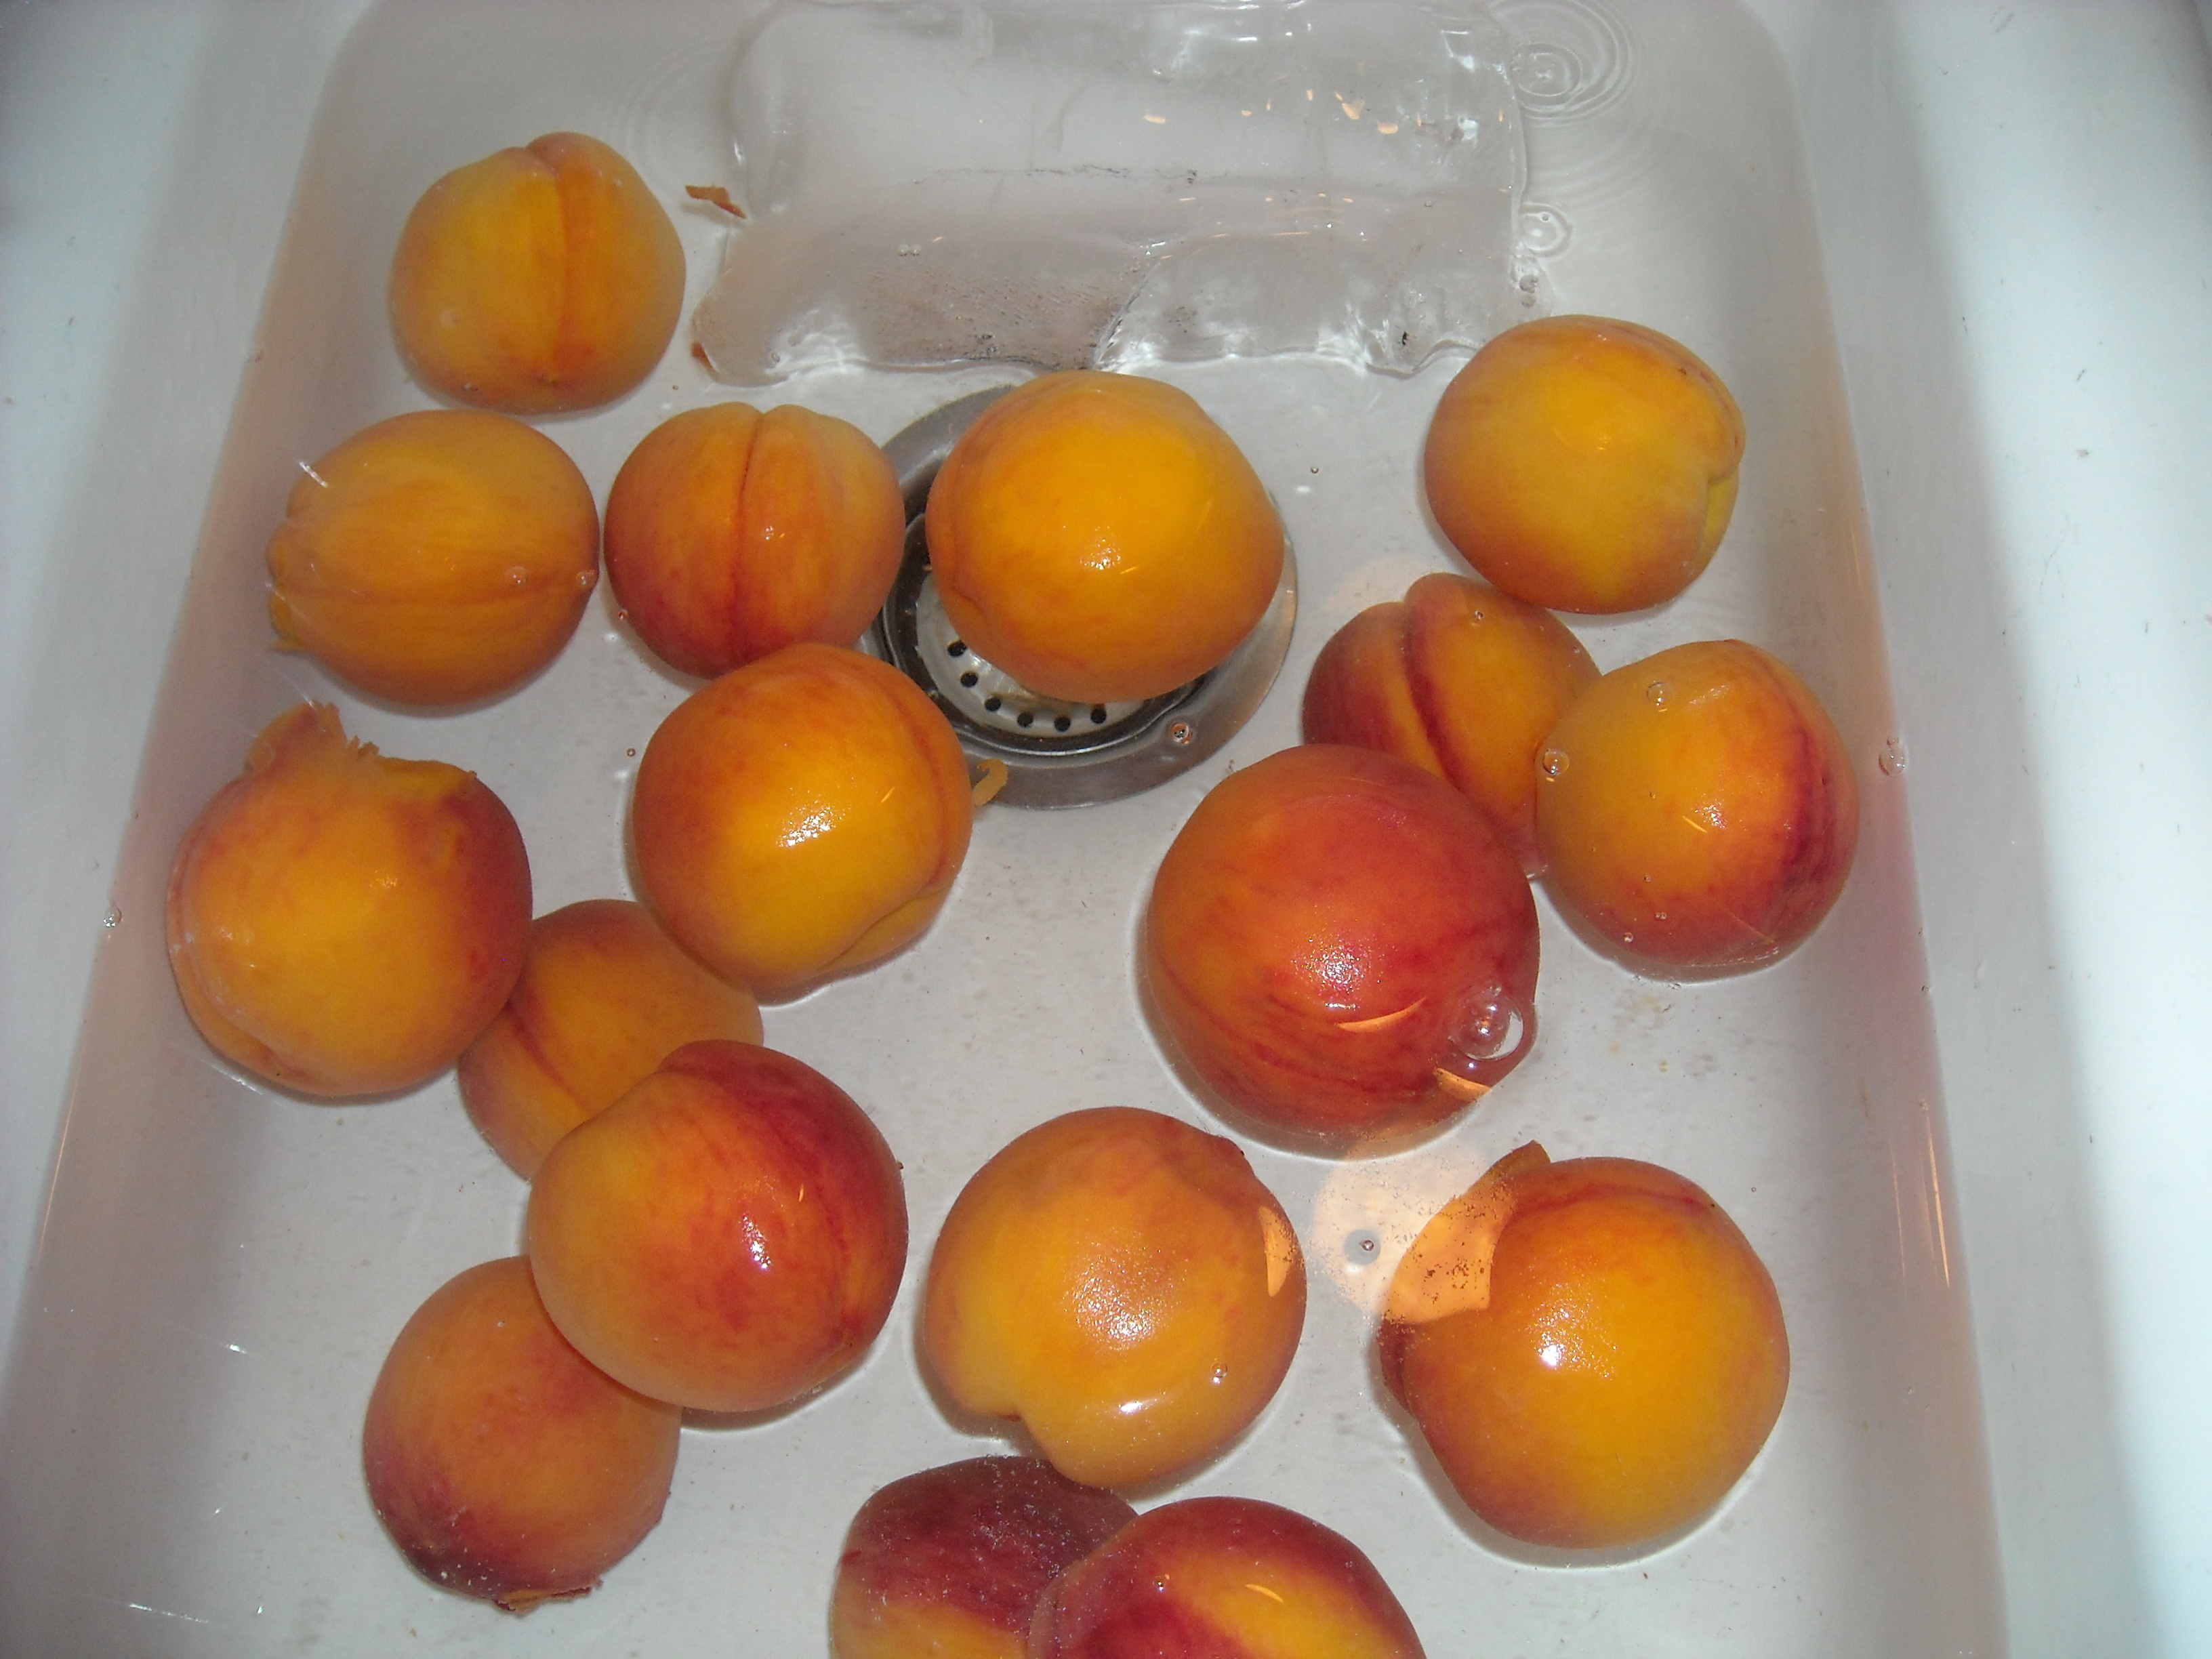 Peaches soaking in cold water.